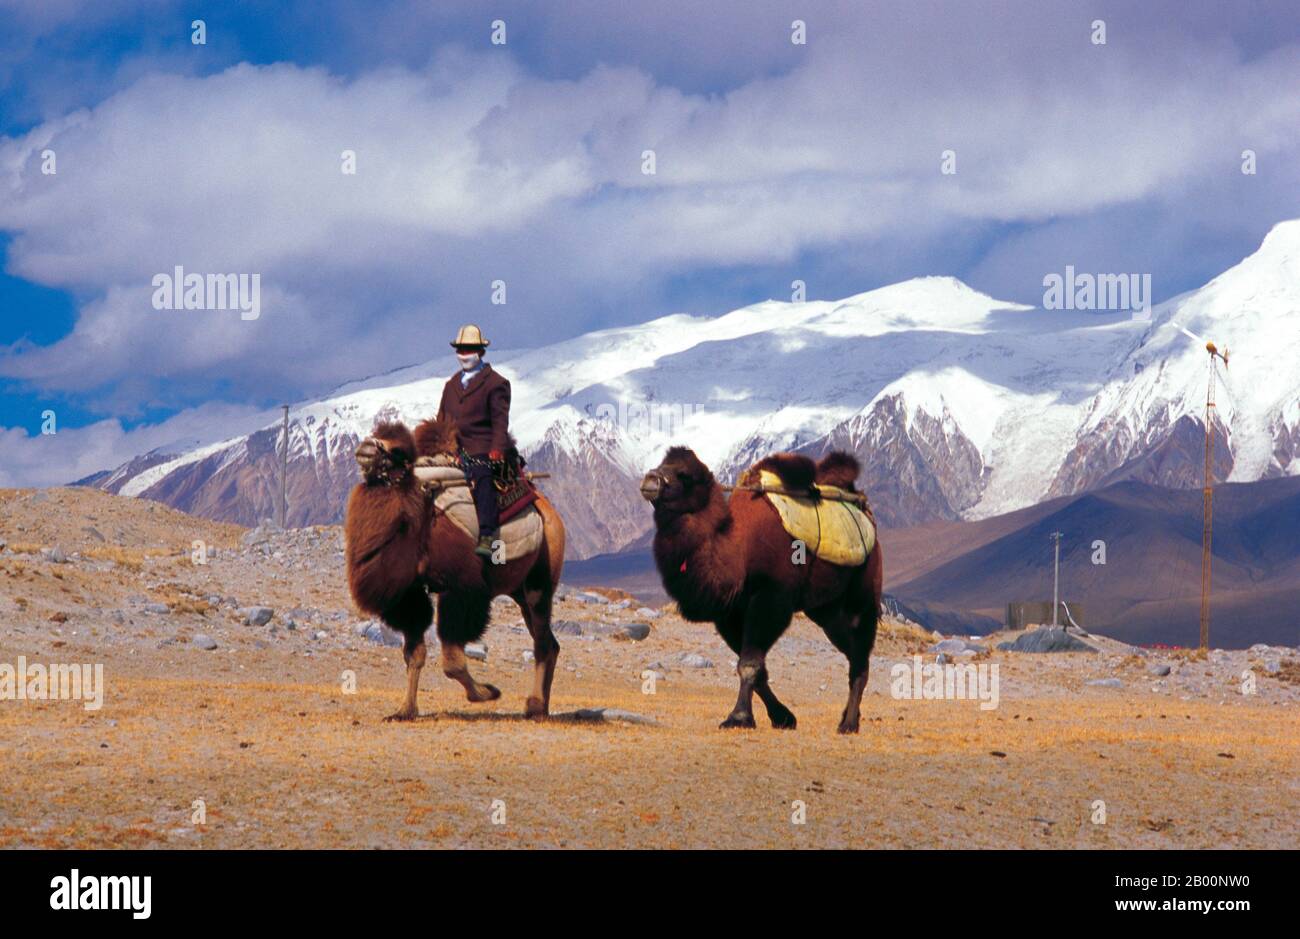 China: Bactrian camels and rider near Lake Karakul on the Karakoram Highway, Xinjiang.  The Bactrian camel (Camelus bactrianus) is a large even-toed ungulate native to the steppes of central Asia. It is presently restricted in the wild to remote regions of the Gobi and Taklimakan Deserts of Mongolia and Xinjiang, China. The Bactrian camel has two humps on its back, in contrast to the single-humped Dromedary camel. Stock Photo